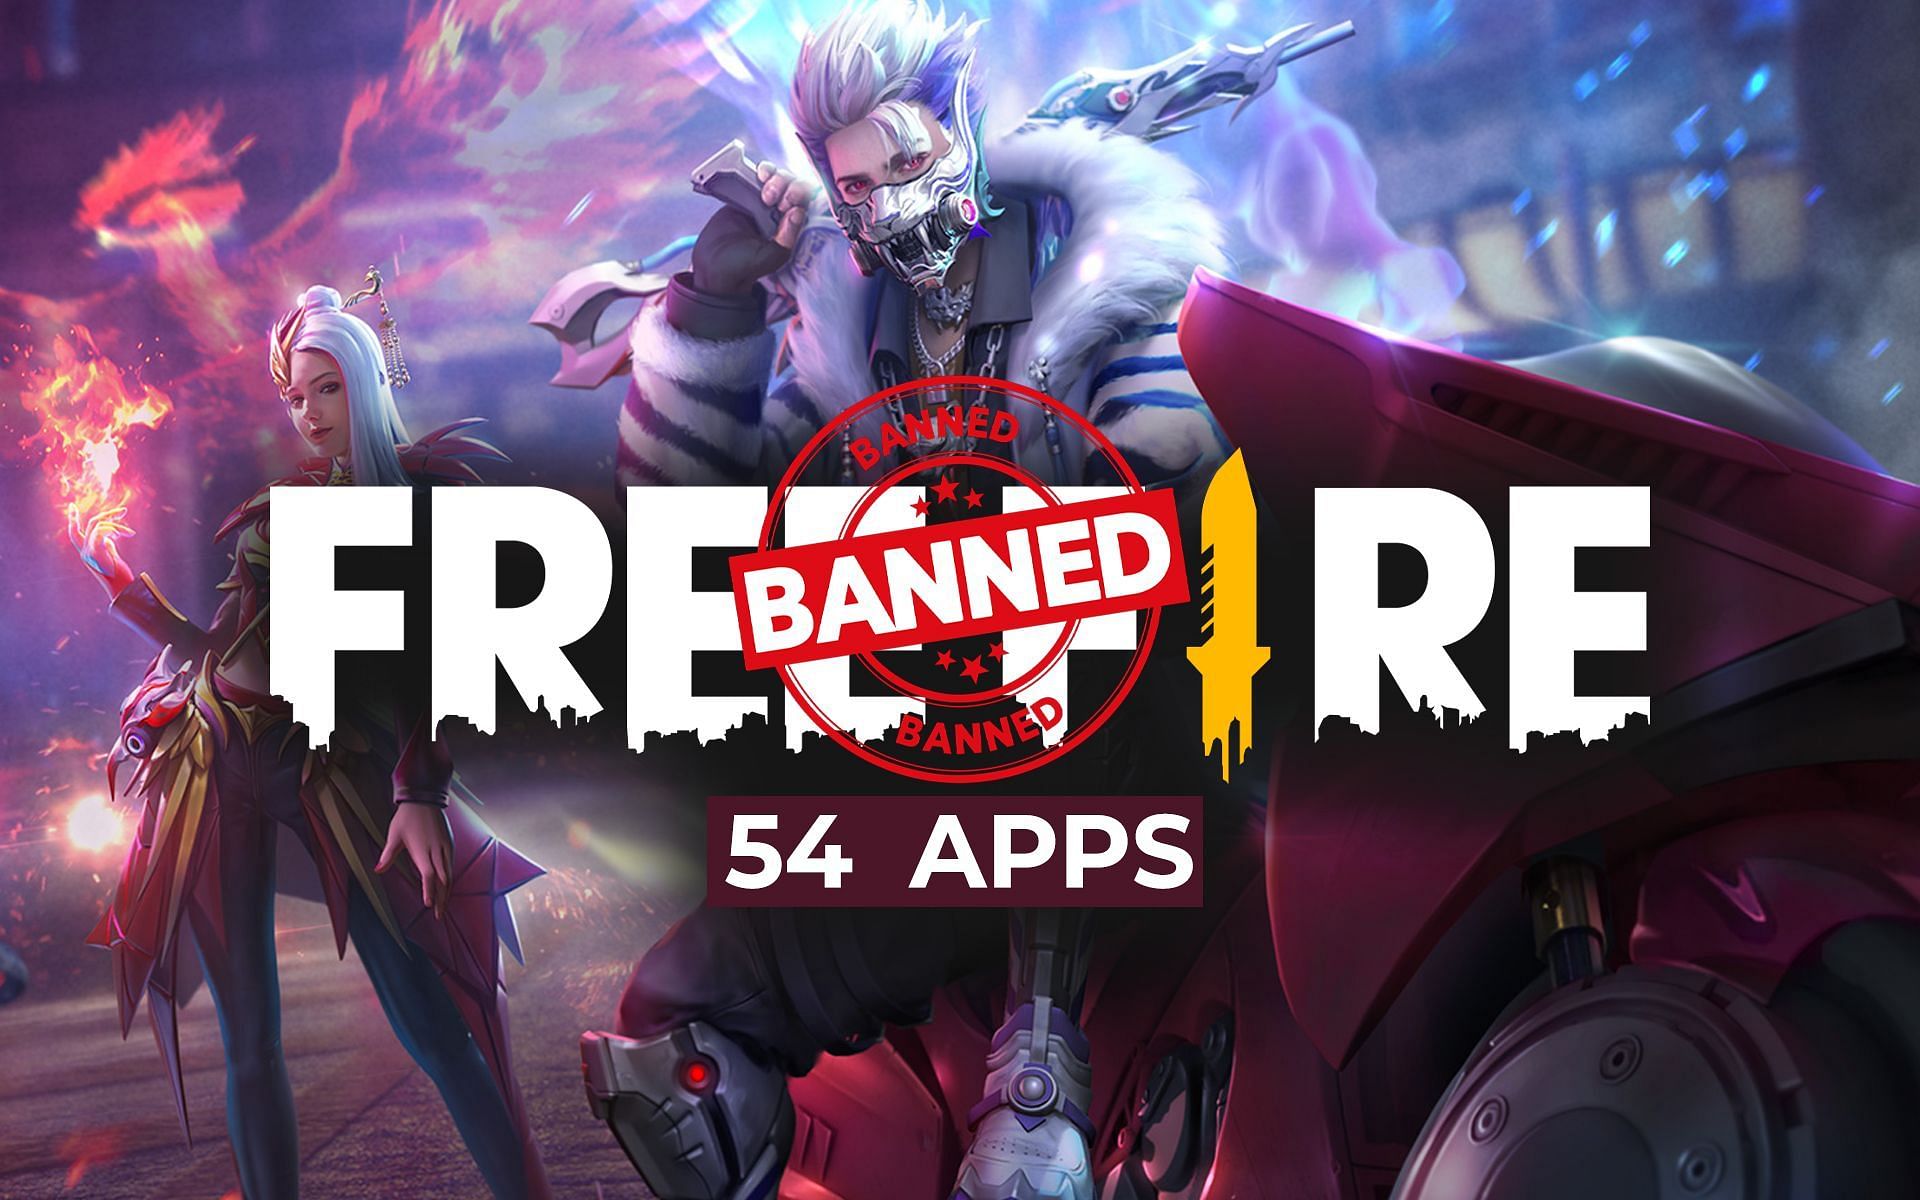 Free Fire and 53 others Chinese apps banned over India by Govt